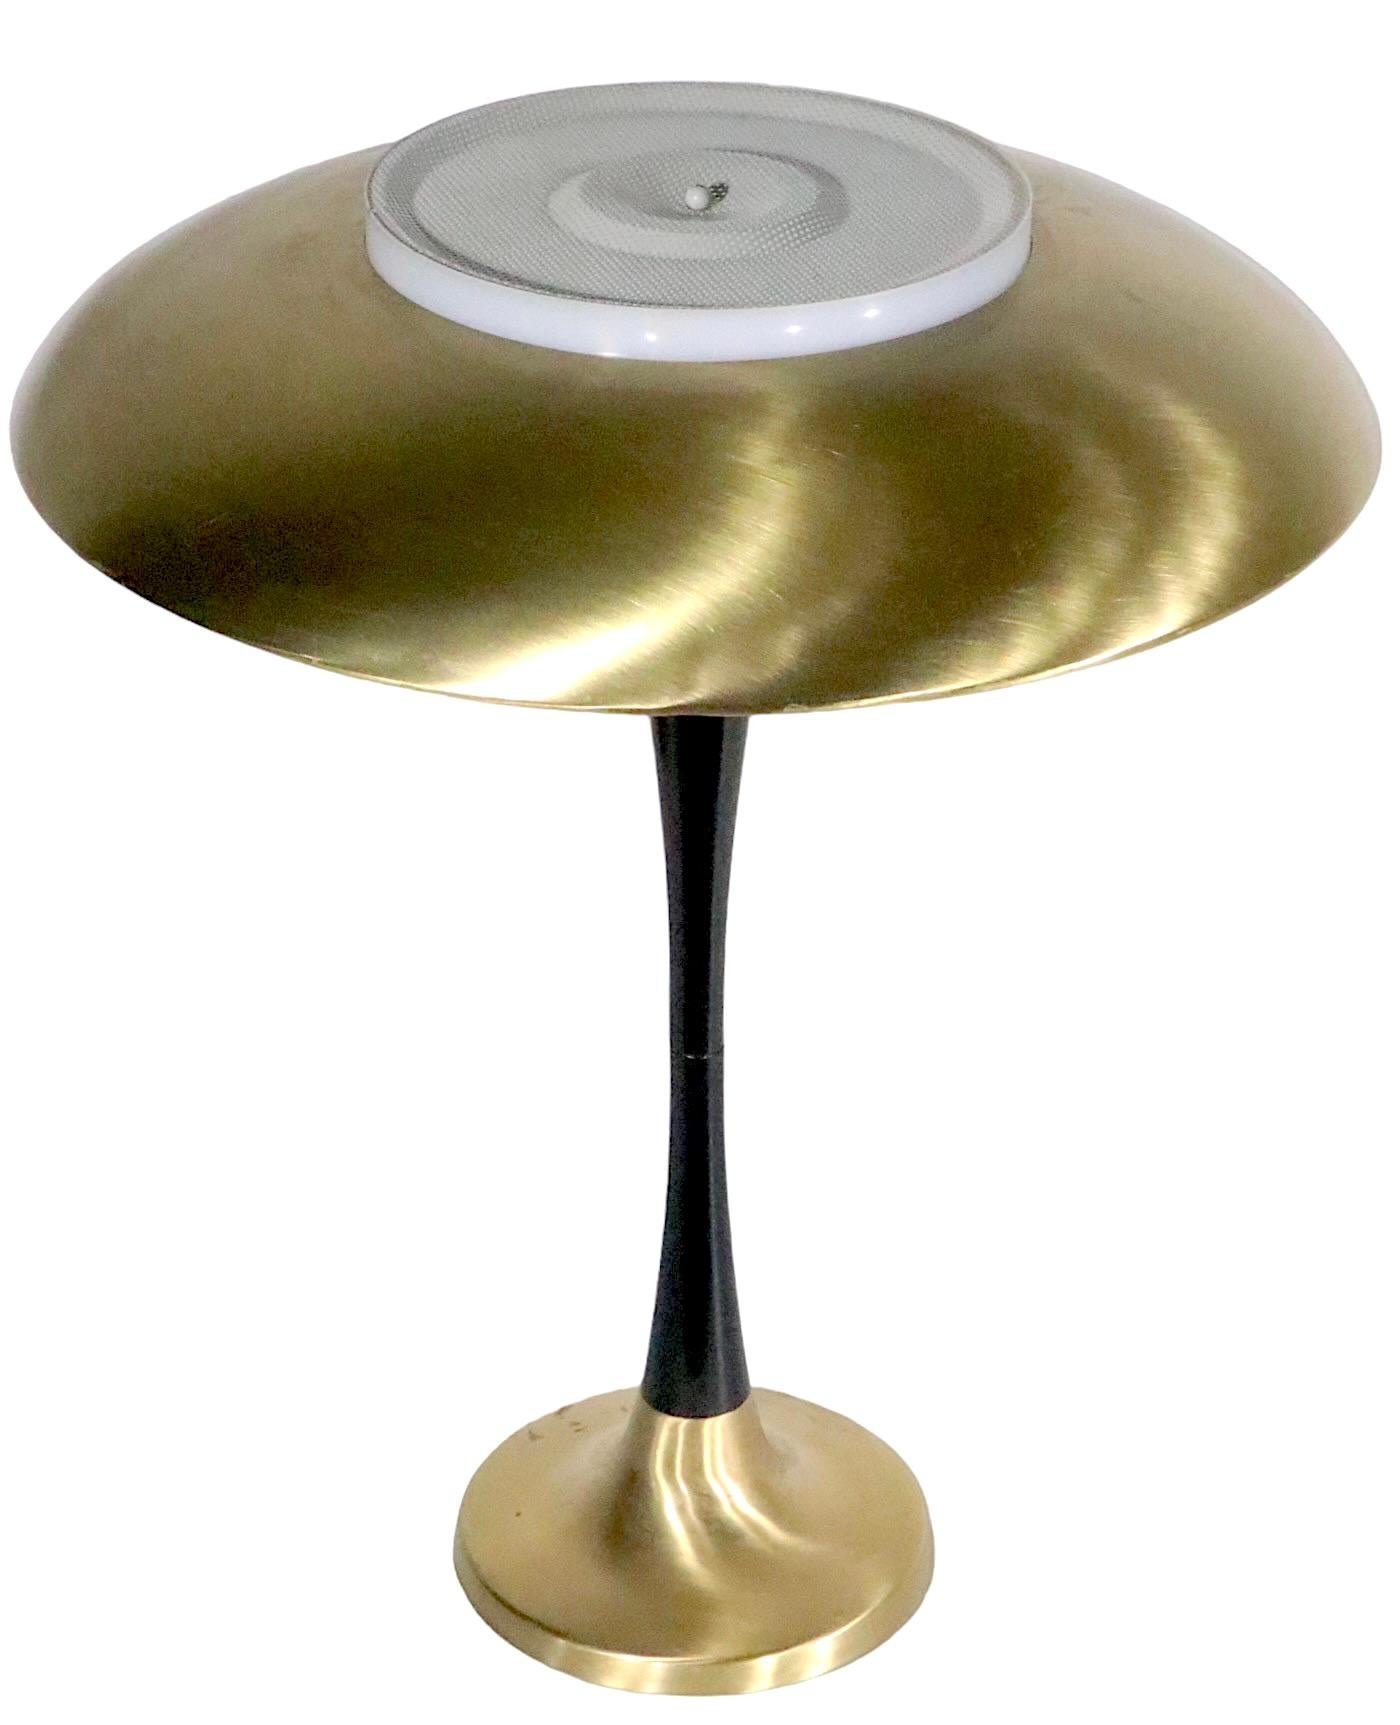 Chic architectural Mid Century dome top table lamp, attributed to Gerald Thurston, for Lightolier - circa 1950/1960's. The lamp features a circular domed top shade, which rests on a center post with an interior plastic diffuser. The vertical post is